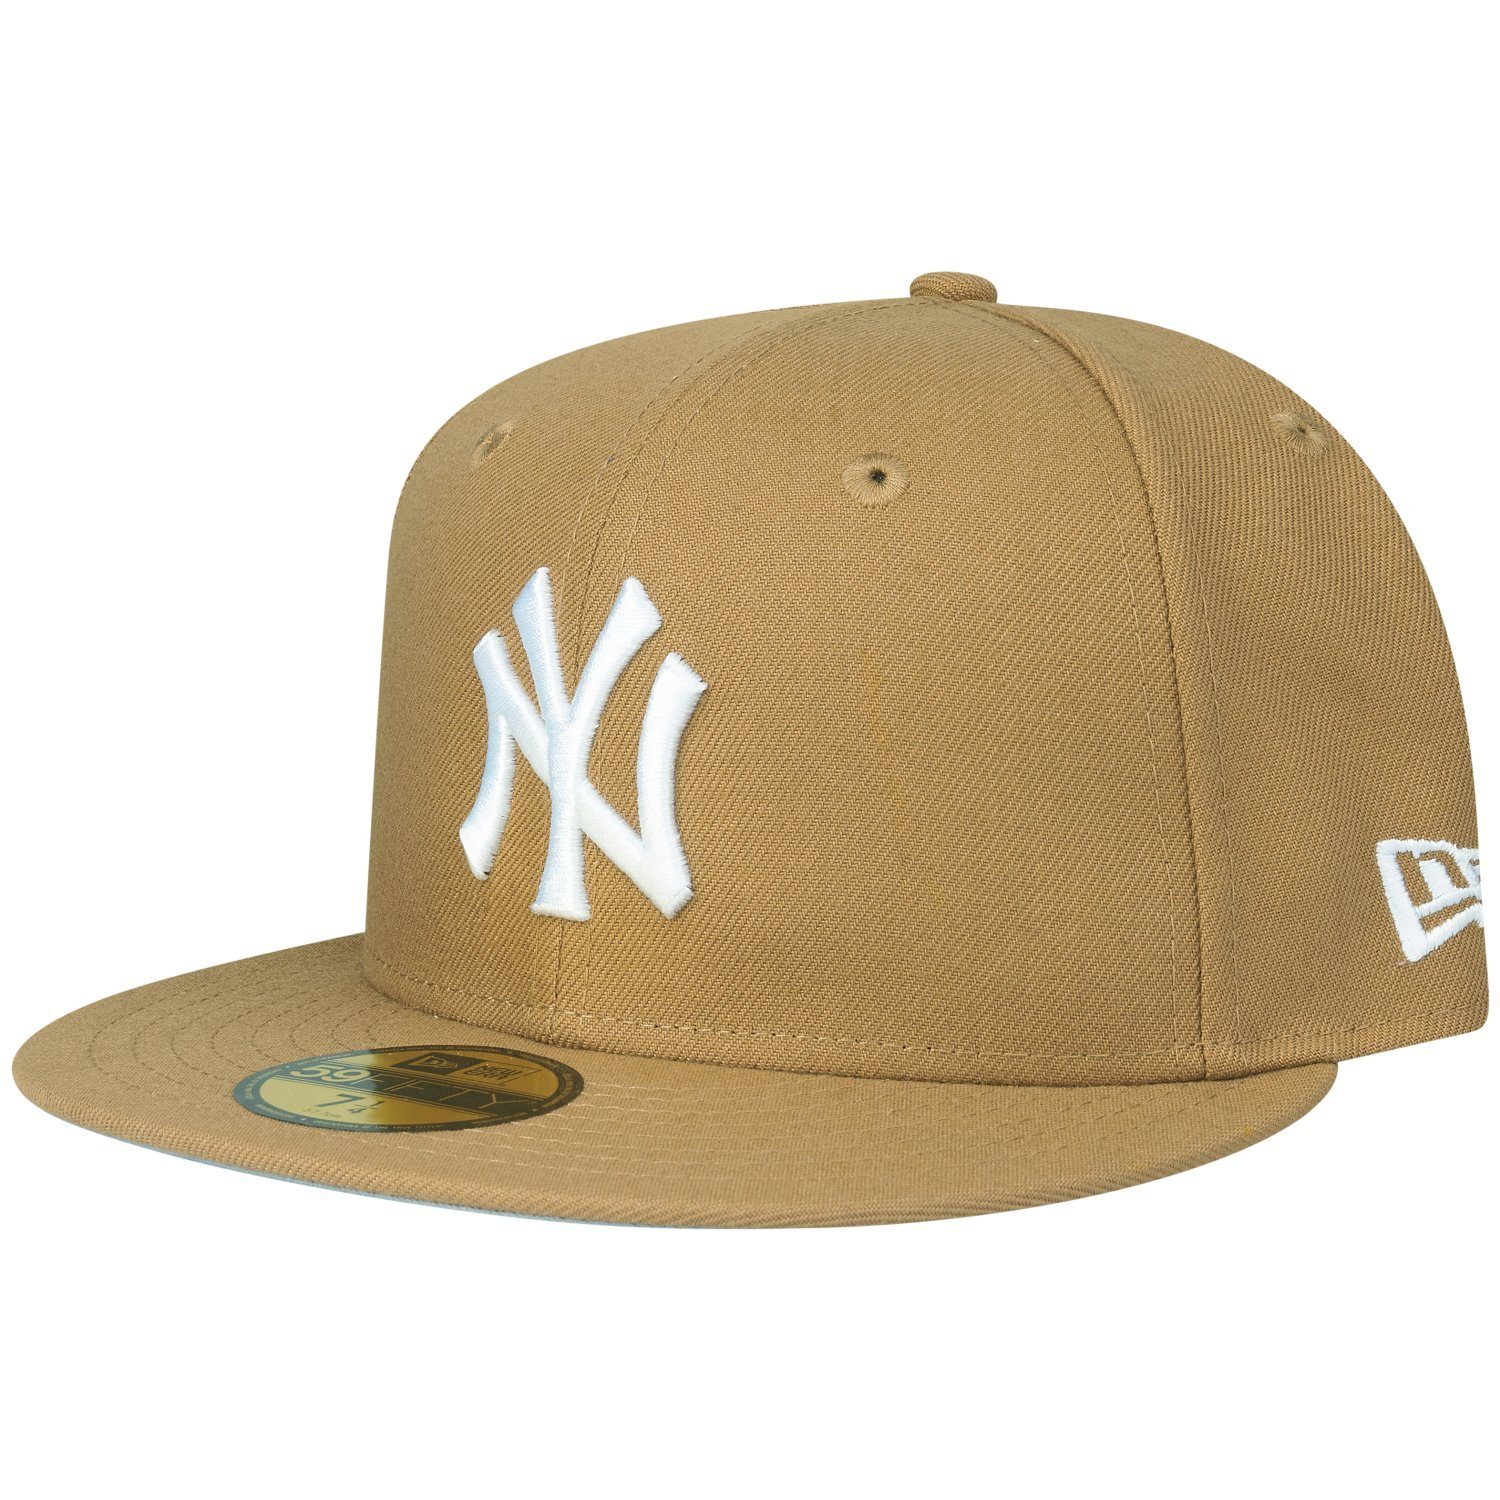 Fitted New Cap York Era New Yankees 59Fifty